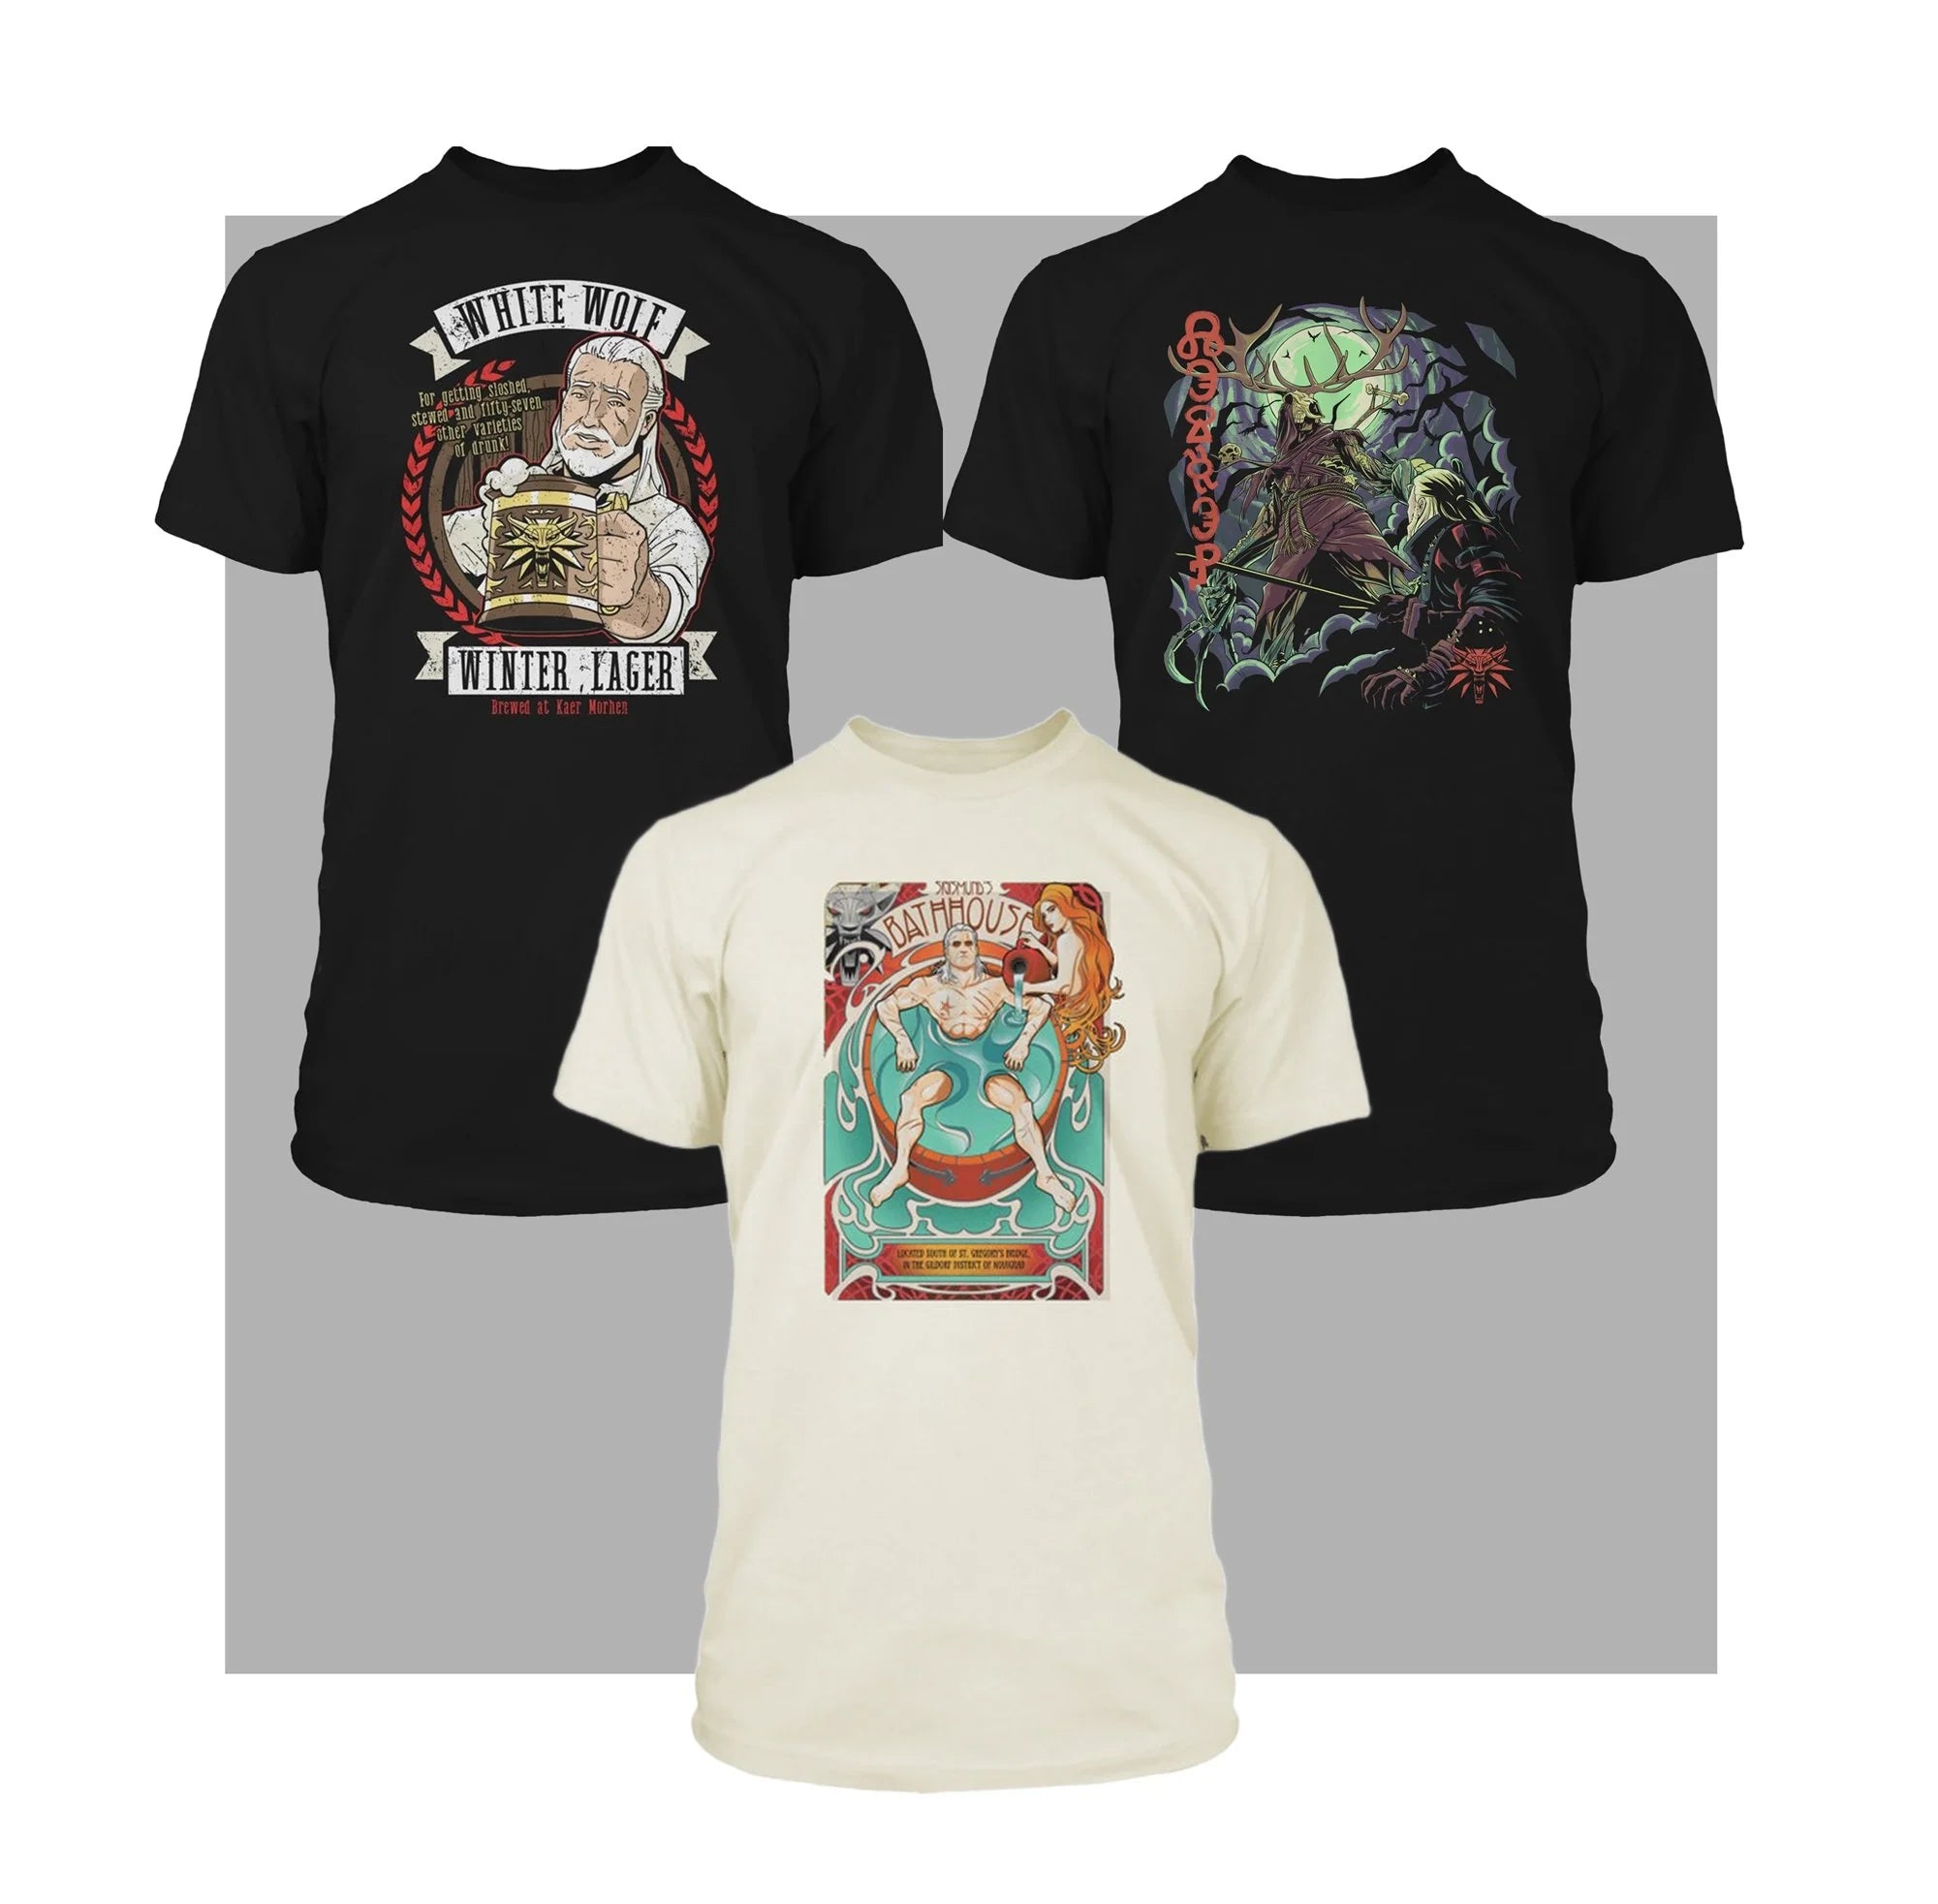 three Witcher shirts, one of Gerlat in a bathtub another with Geralt Holding a beer mug and a third of Geralt slaying a Basilisk.